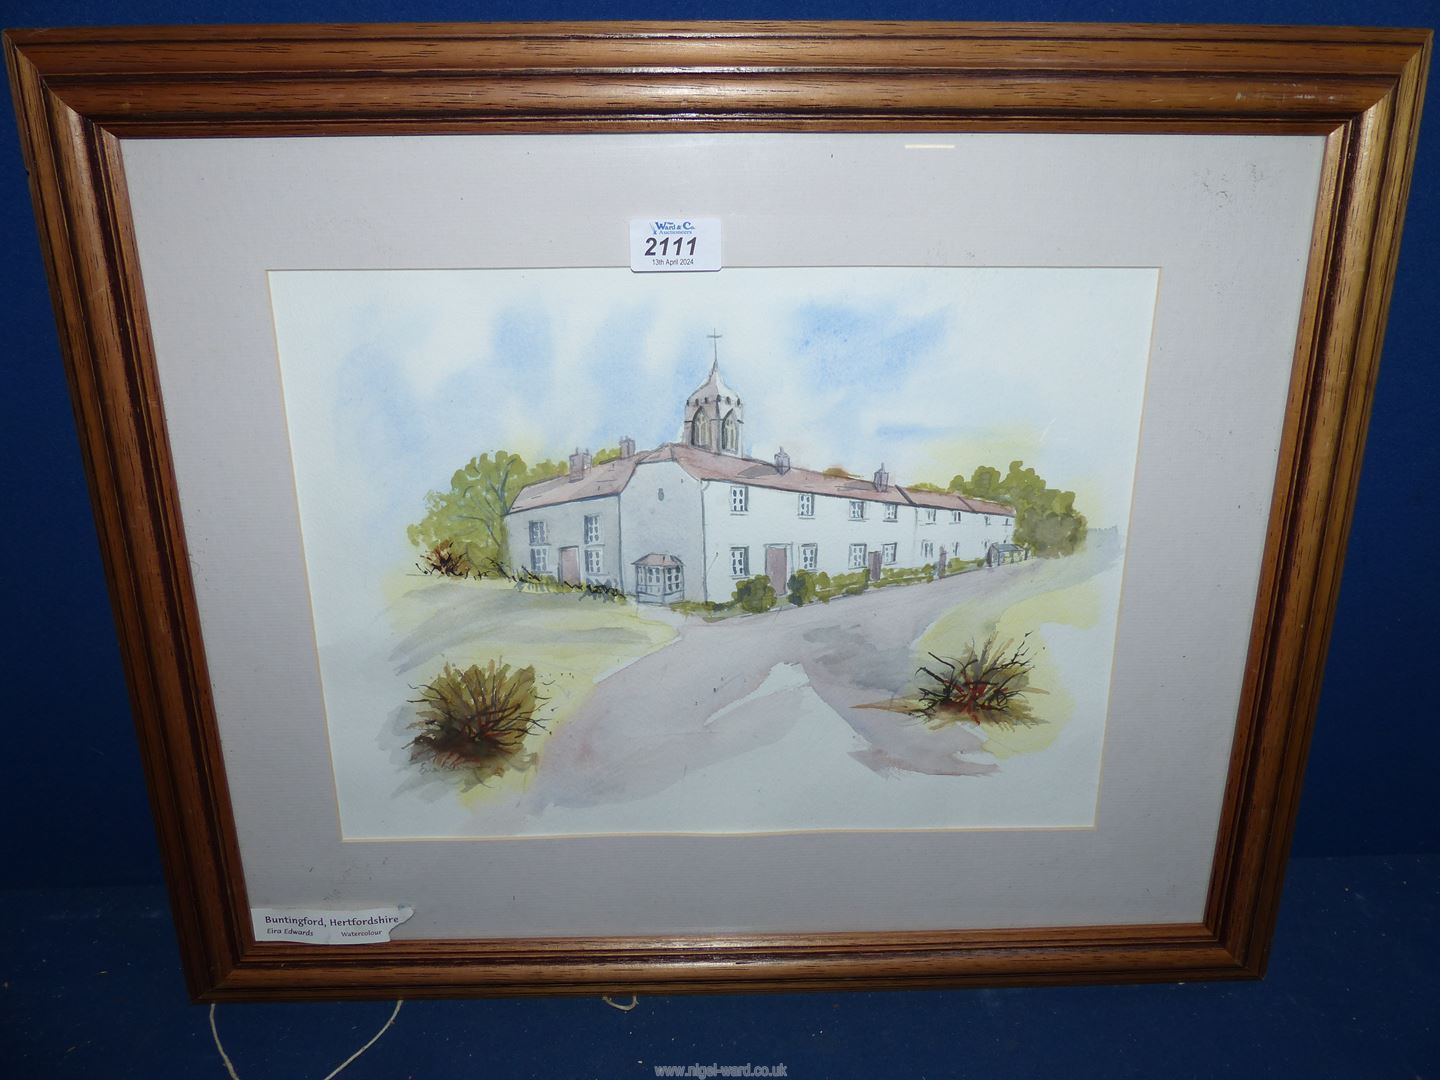 A framed and mounted Watercolour depicting Buntingford Hertfordshire,